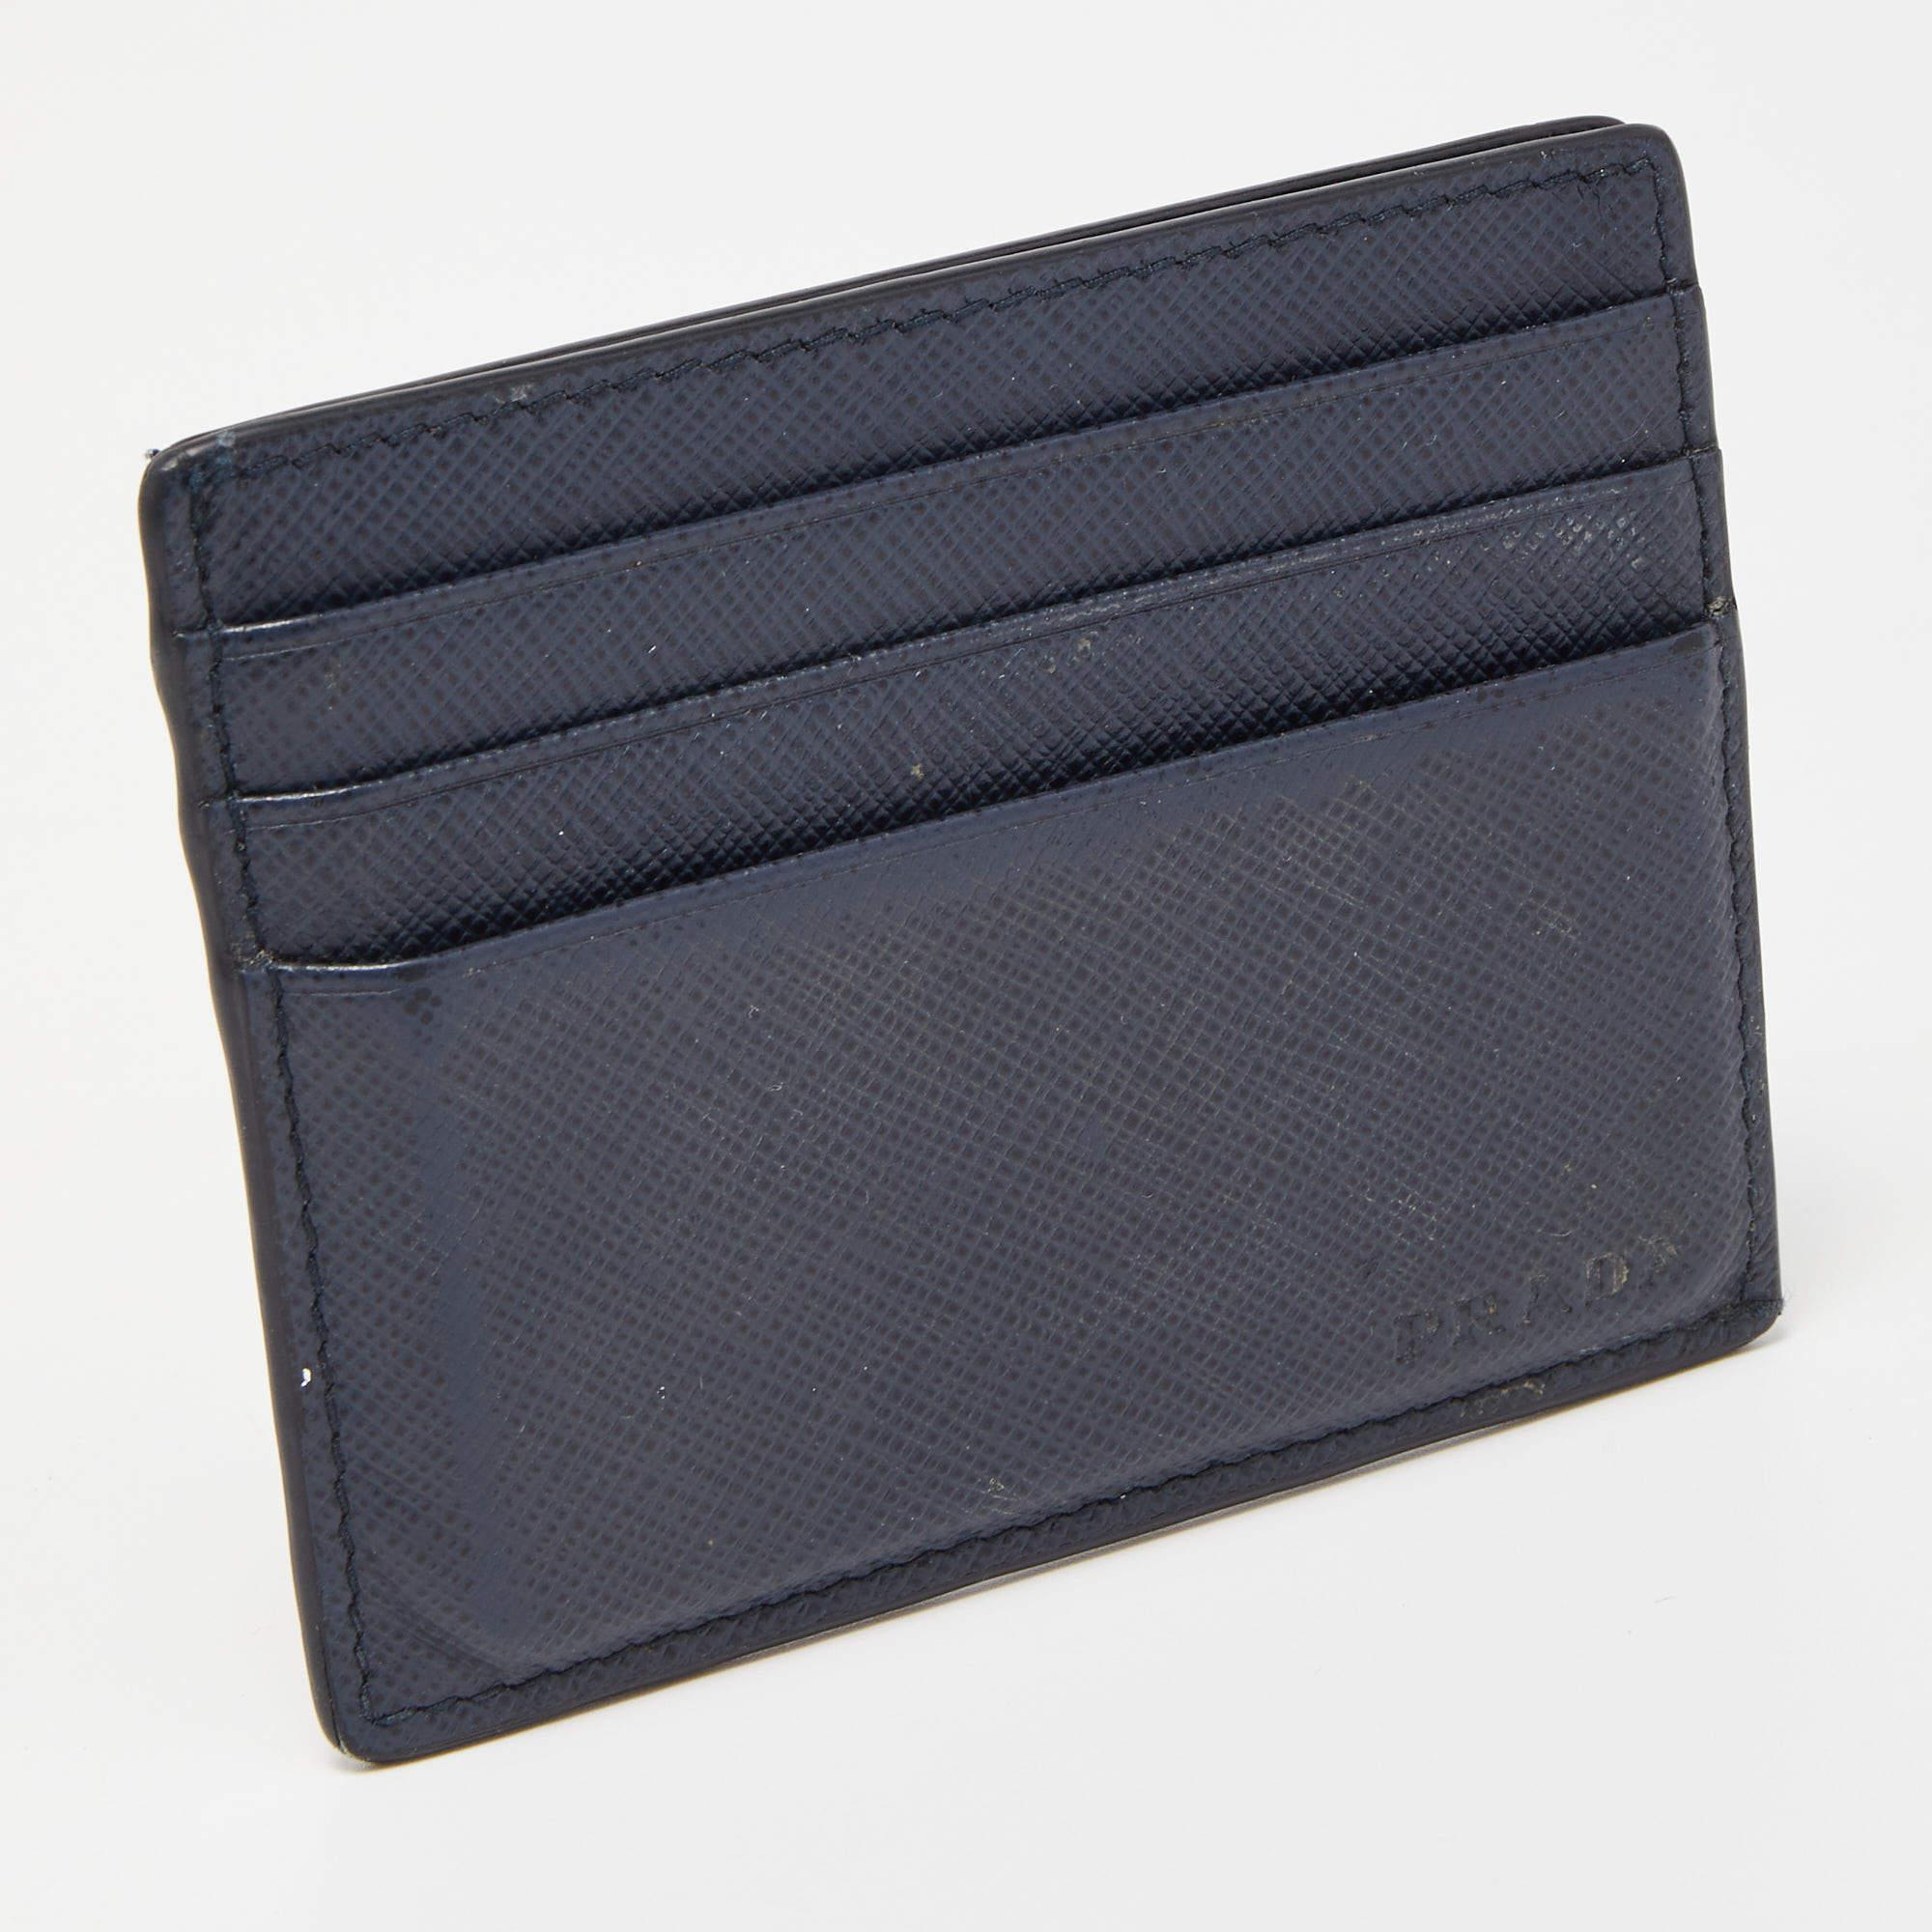 This stylish and functional cardholder is a must-have in your collection. It is equipped with multiple, well-lined slots to hold your cards.

